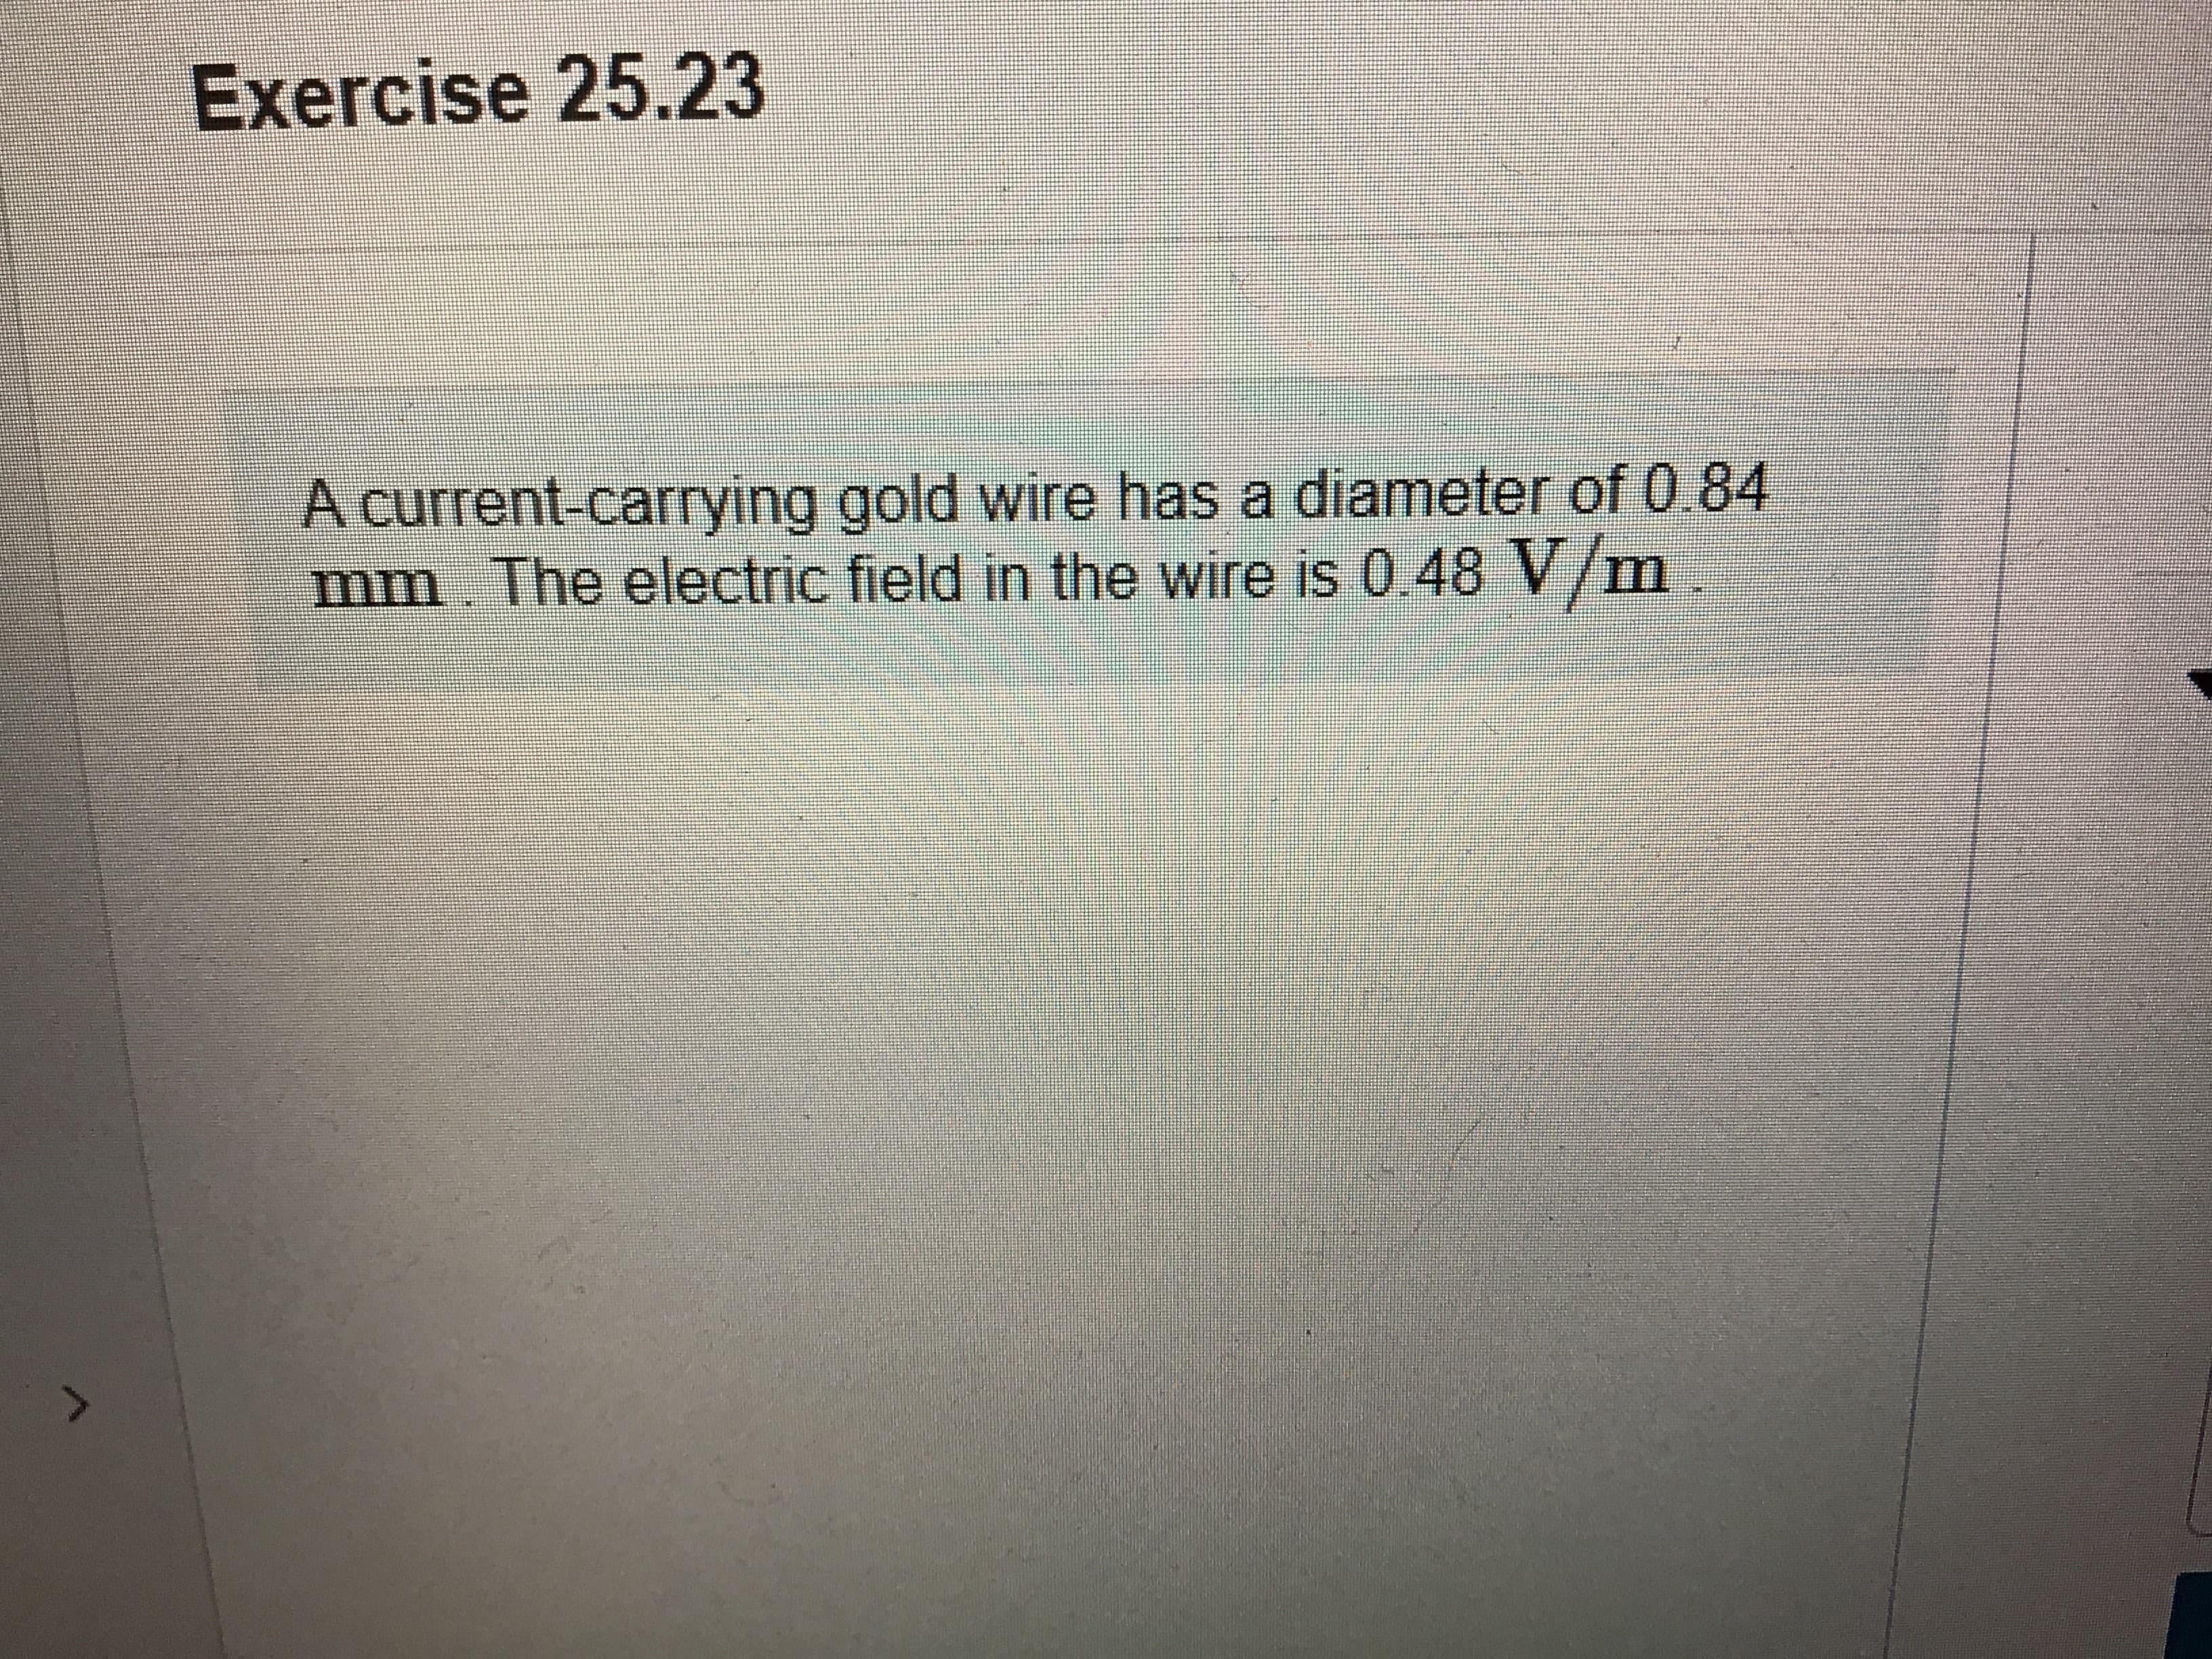 Exercise 25.23
A current-carrying gold wire has a diameter of 0.84
mm. The electric field in the wire is 0.48 V/m
